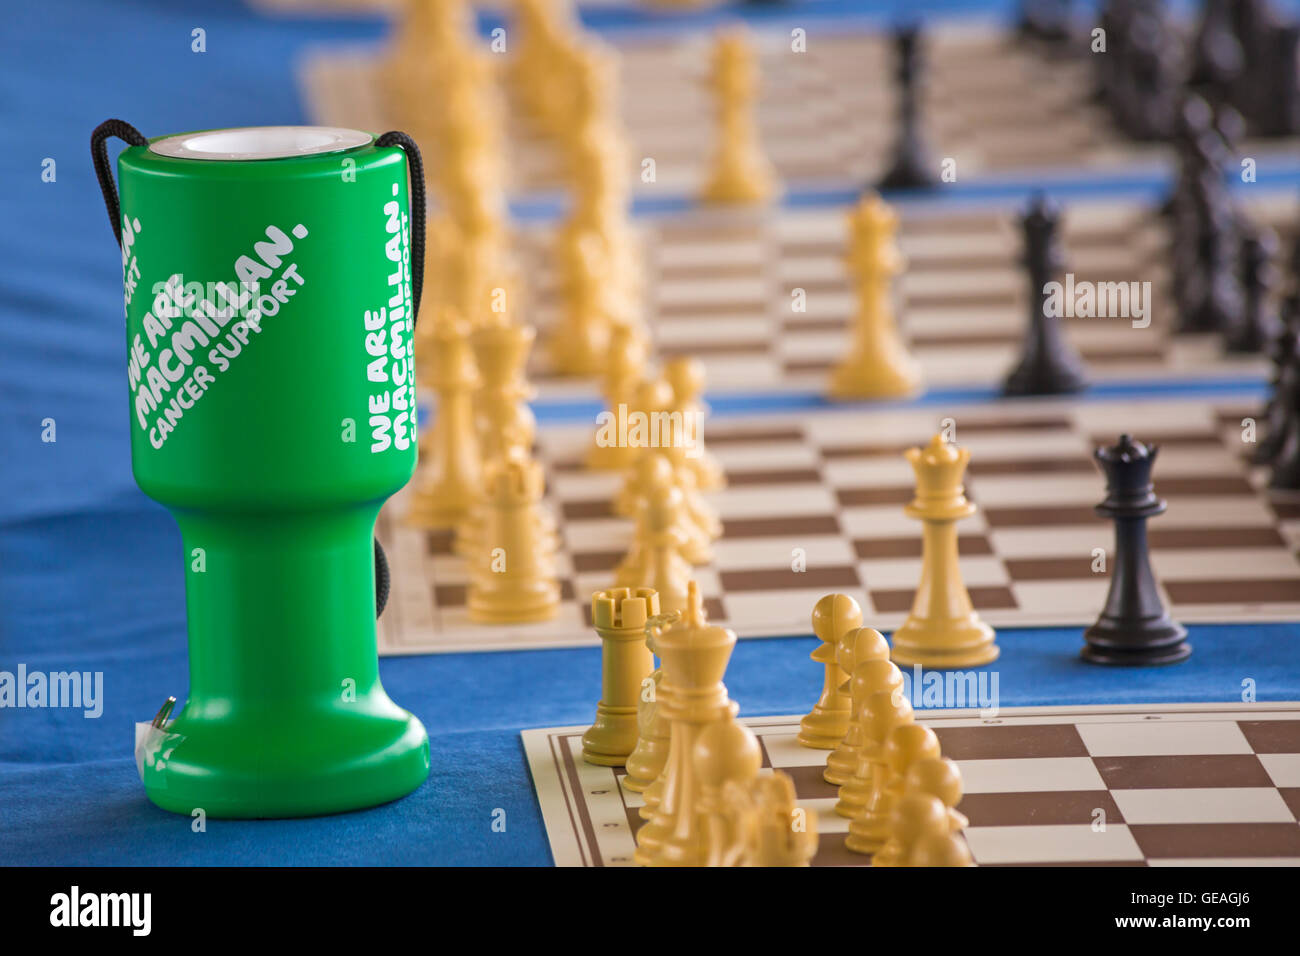 Bournemouth, Dorset, UK. 24 July 2016. Meri's Simultaneous Chess Exhibition in Bournemouth with Meri Grigoryan, a Woman FIDE Master who is a West London Chess Club member and an ECF Accredited Coach. Meri plays up to 15 players at a time, raising money for Macmillan Cancer Support Credit:  Carolyn Jenkins/Alamy Live News Stock Photo